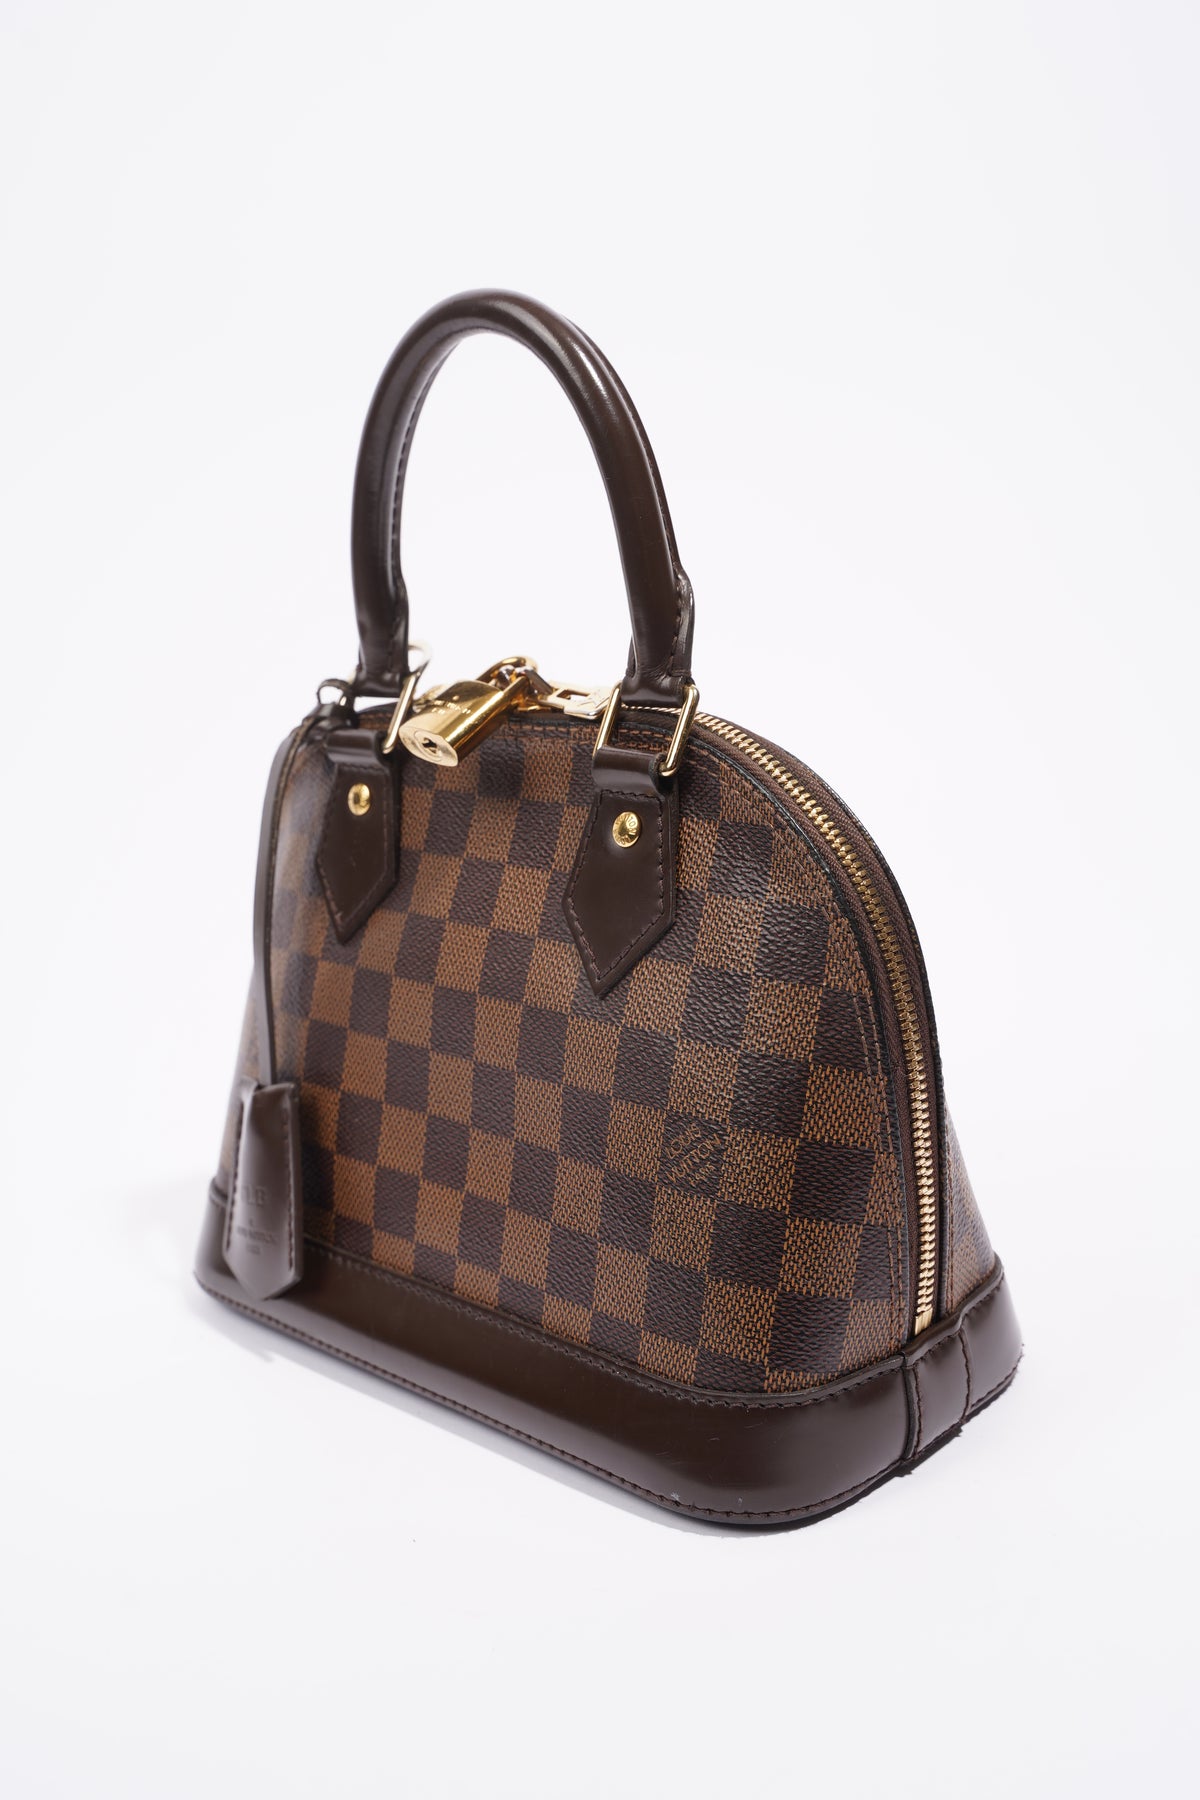 Louis Vuitton, Bags, Used Lv Sac Plat Bb Look Like New 98 Buy It Last  September 22 In Canada